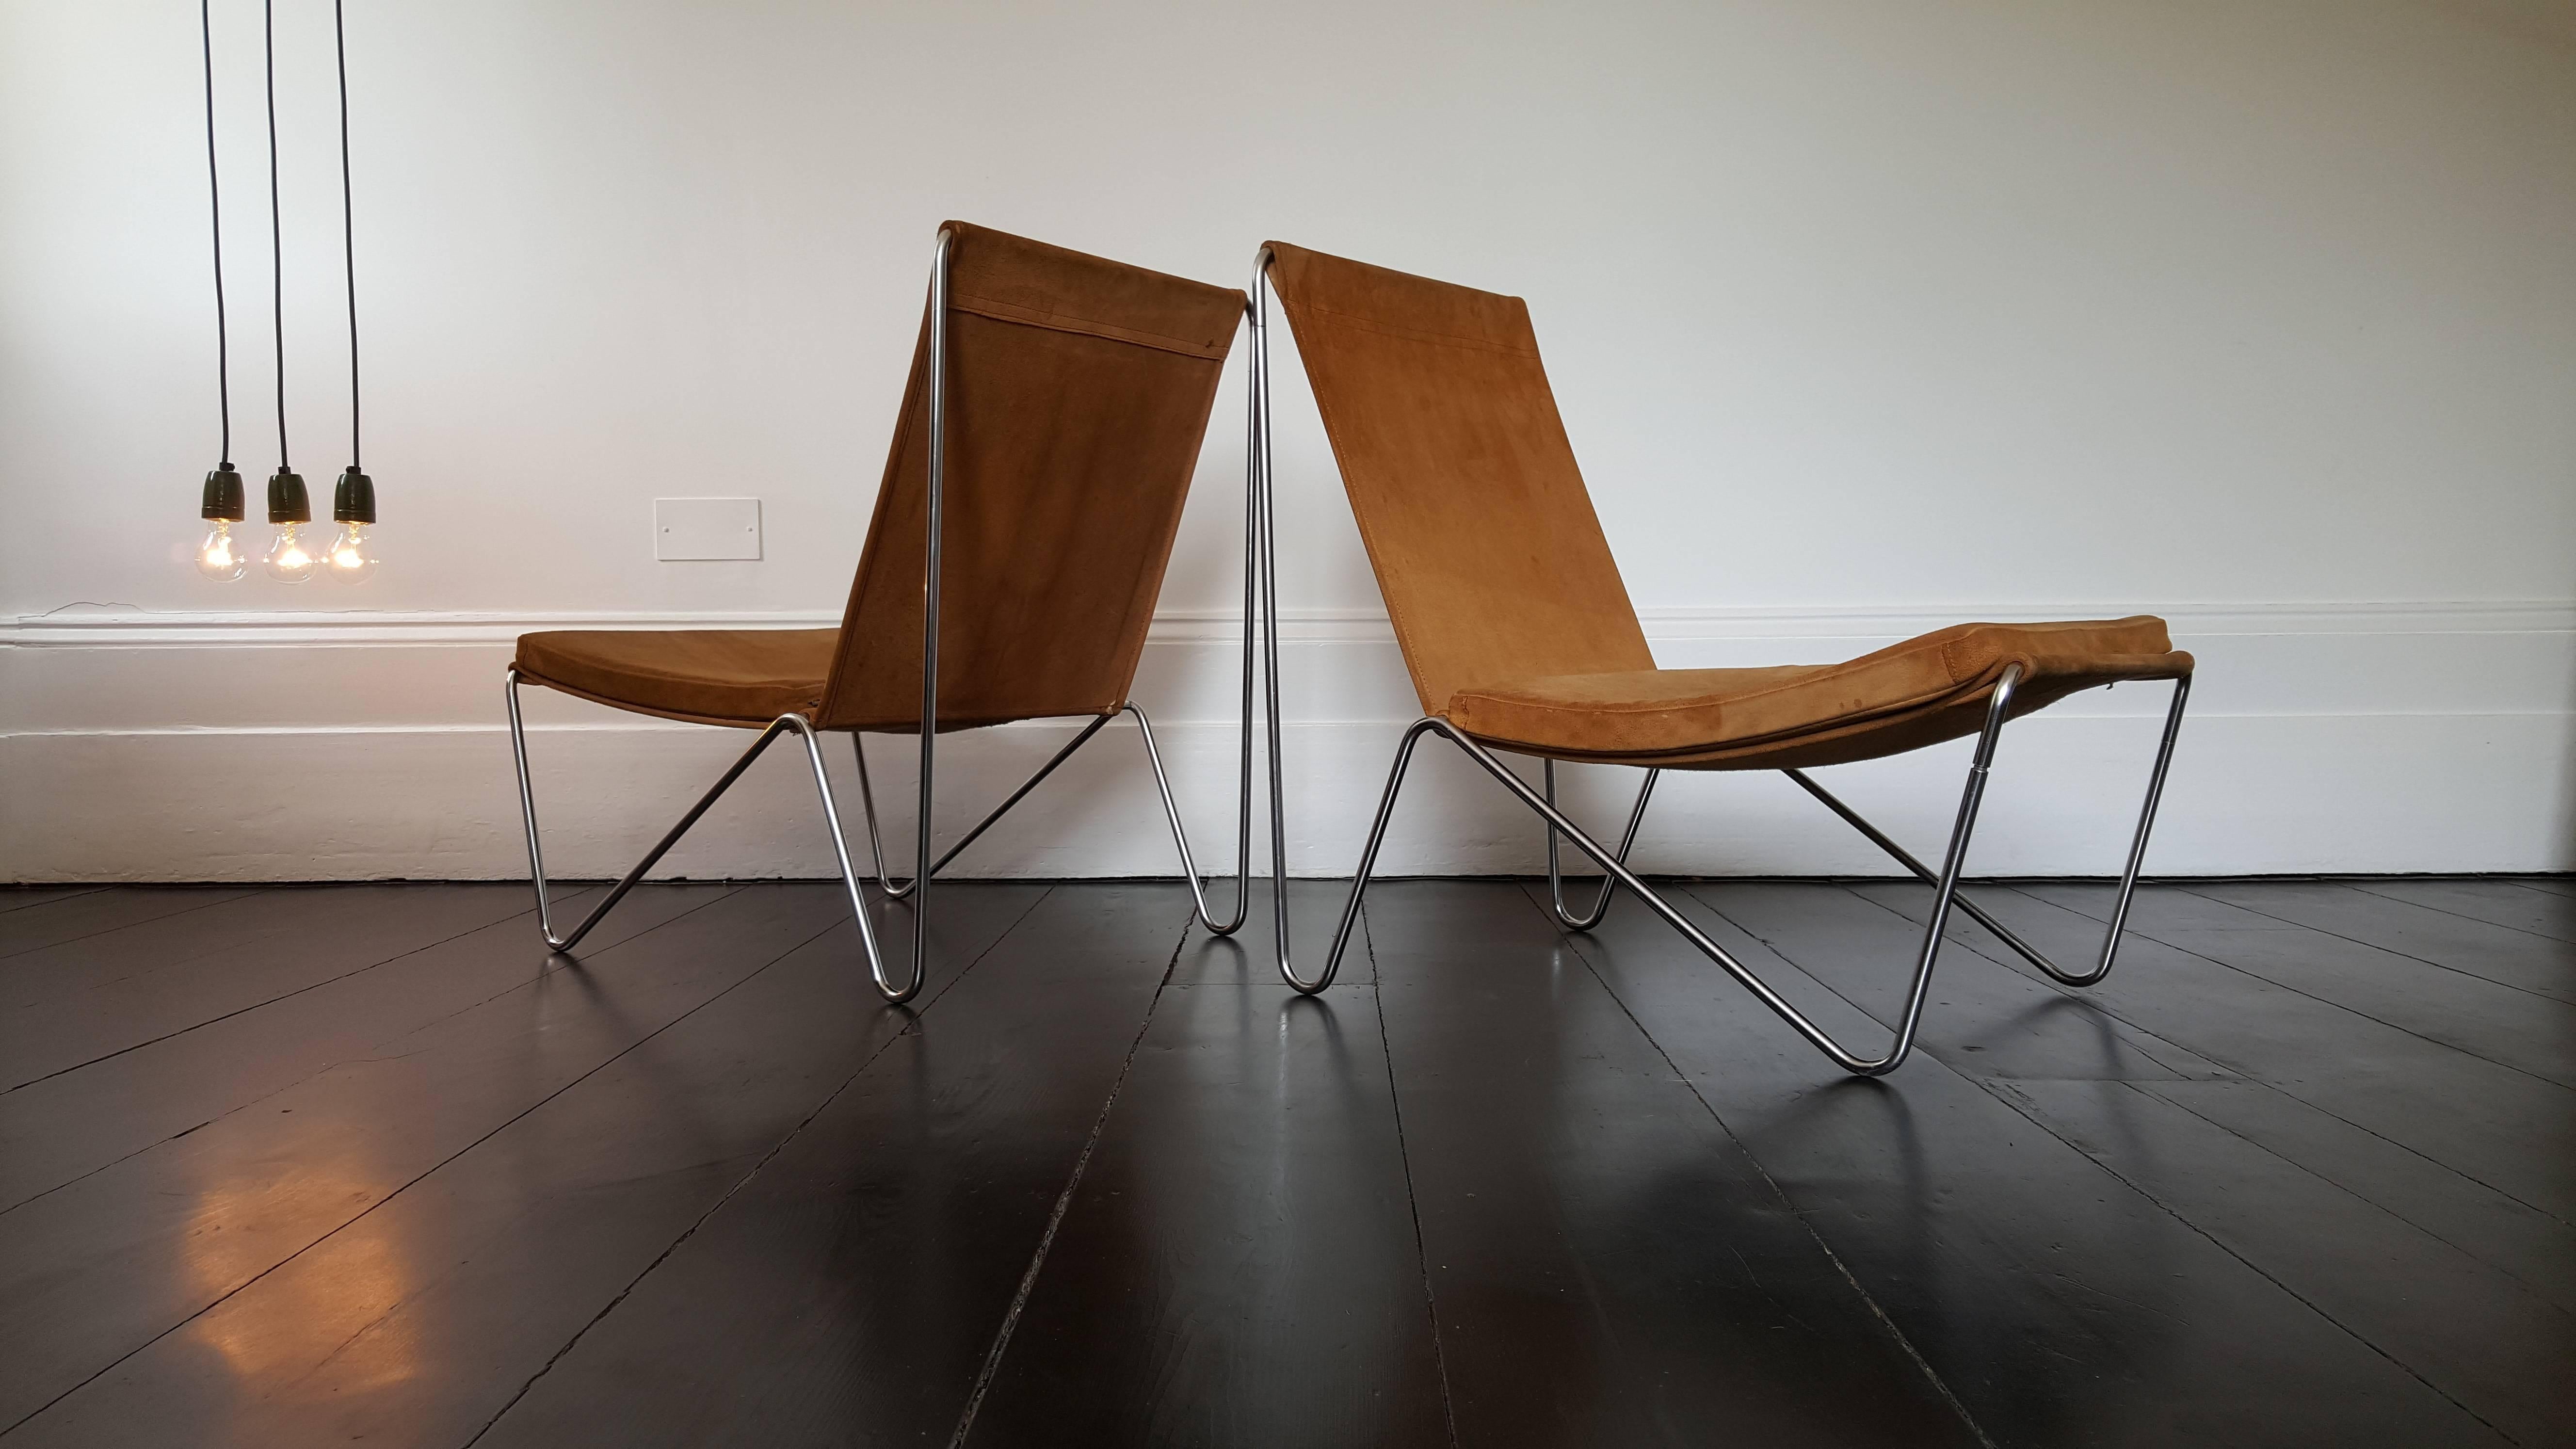 Verner Panton designed Bachelor easy chairs, 1955 for Fritz Hansen, Denmark.

An iconic pair of minimal suede Bachelor easy chairs designed by Verner Panton, and manufactured by Fritz Hansen, Denmark in 1955. 

We ship globally - please contact to